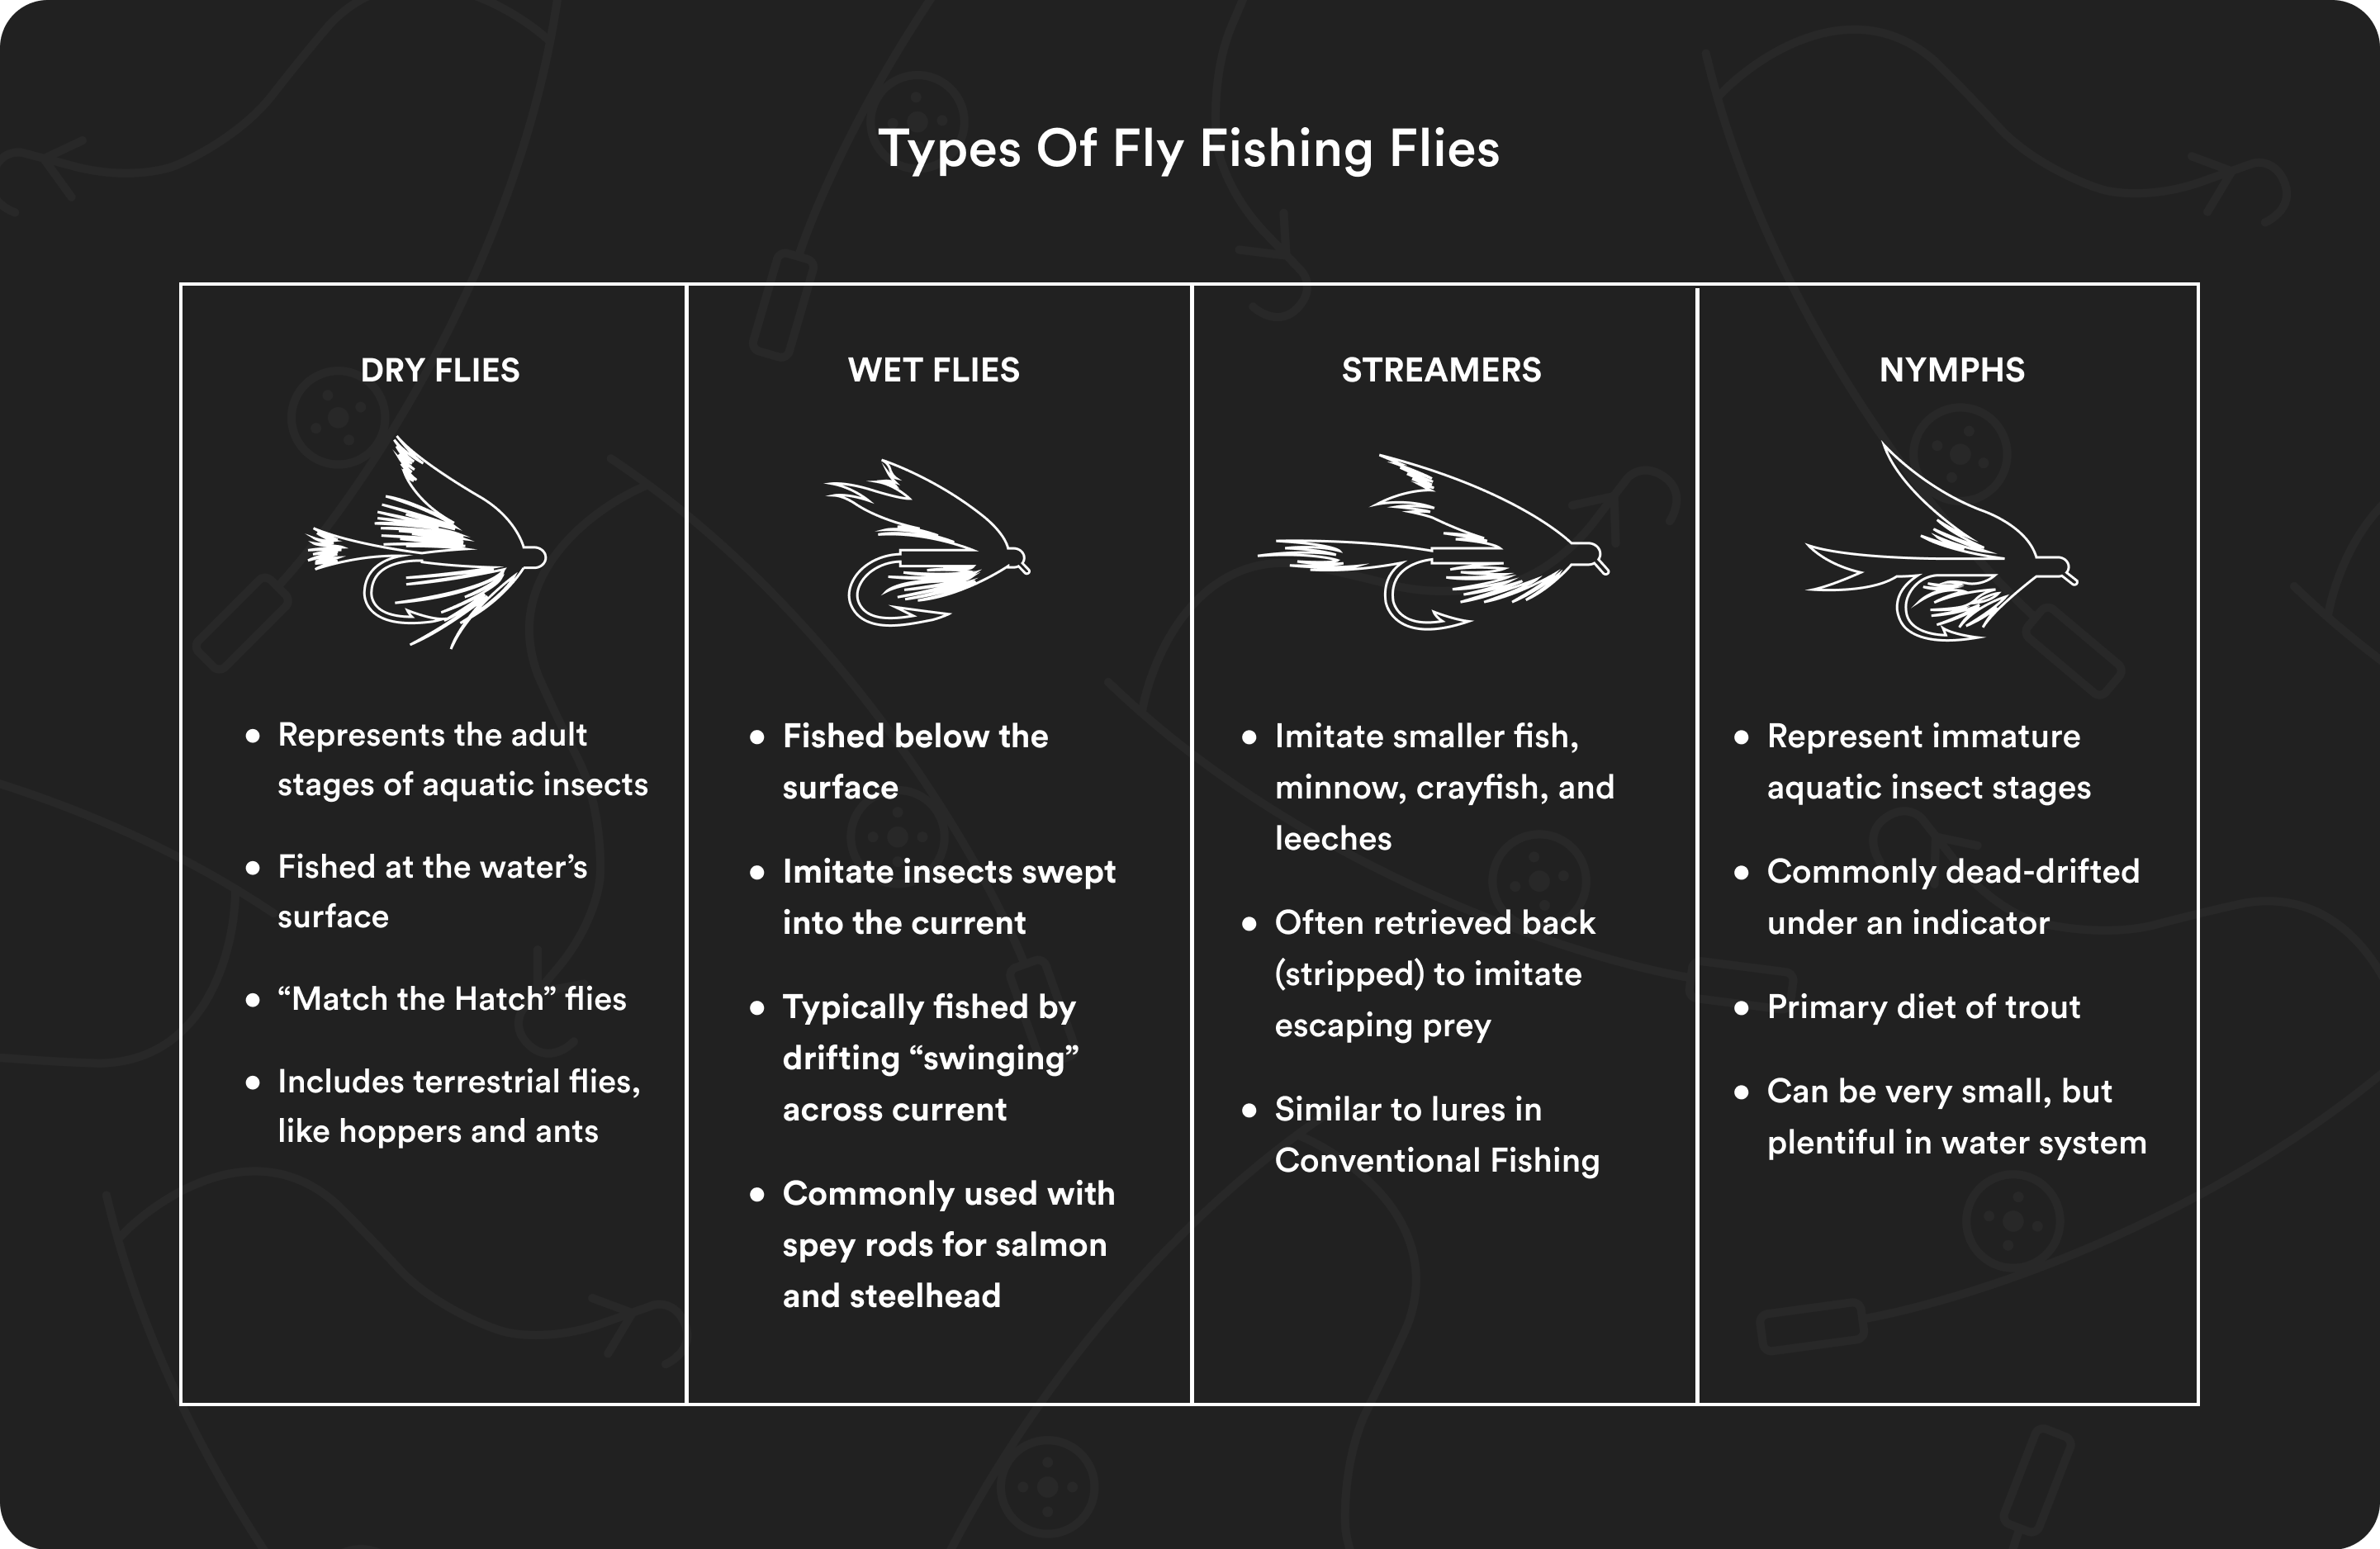 A chart showing the different types of fly fishing flies and their attributes.